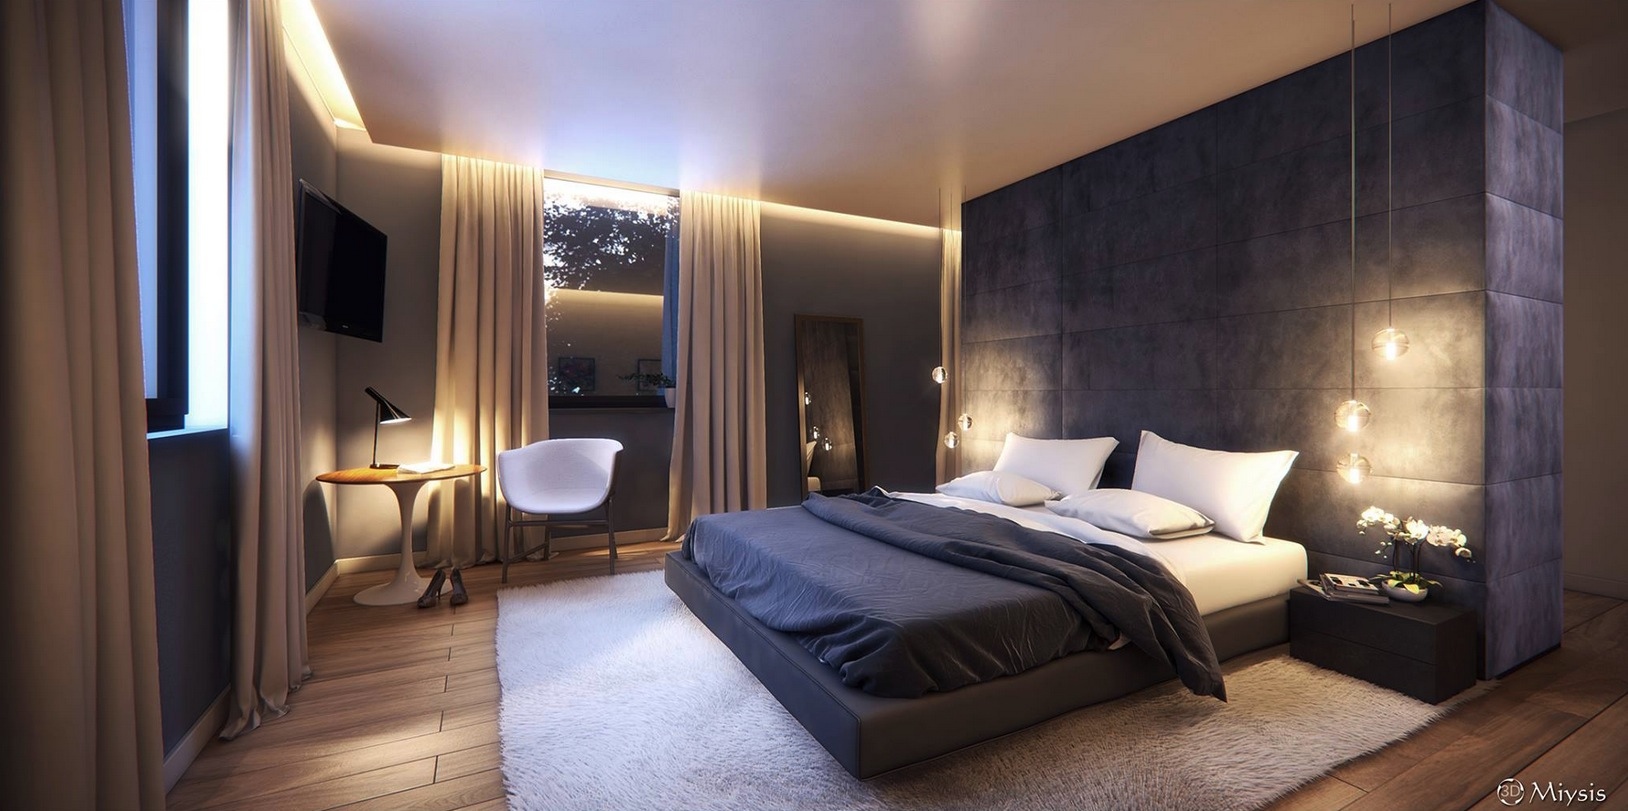 fantastic bedroom design "width =" 1628 "height =" 811 "srcset =" https://mileray.com/wp-content/uploads/2020/05/1588507754_156_10-Top-Of-Minimalist-Bedroom-Ideas-Combined-With-Modern-and.jpeg 1628w, https://mileray.com/wp- content / uploads / 2016/10 / Miysis-300x149.jpeg 300w, https://mileray.com/wp-content/uploads/2016/10/Miysis-768x383.jpeg 768w, https://mileray.com/wp- content / uploads / 2016/10 / Miysis-1024x510.jpeg 1024w, https://mileray.com/wp-content/uploads/2016/10/Miysis-324x160.jpeg 324w, https://mileray.com/wp- content / uploads / 2016/10 / Miysis-696x347.jpeg 696w, https://mileray.com/wp-content/uploads/2016/10/Miysis-1068x532.jpeg 1068w, https://mileray.com/wp- content / Uploads / 2016/10 / Miysis-843x420.jpeg 843w "sizes =" (maximum width: 1628px) 100vw, 1628px